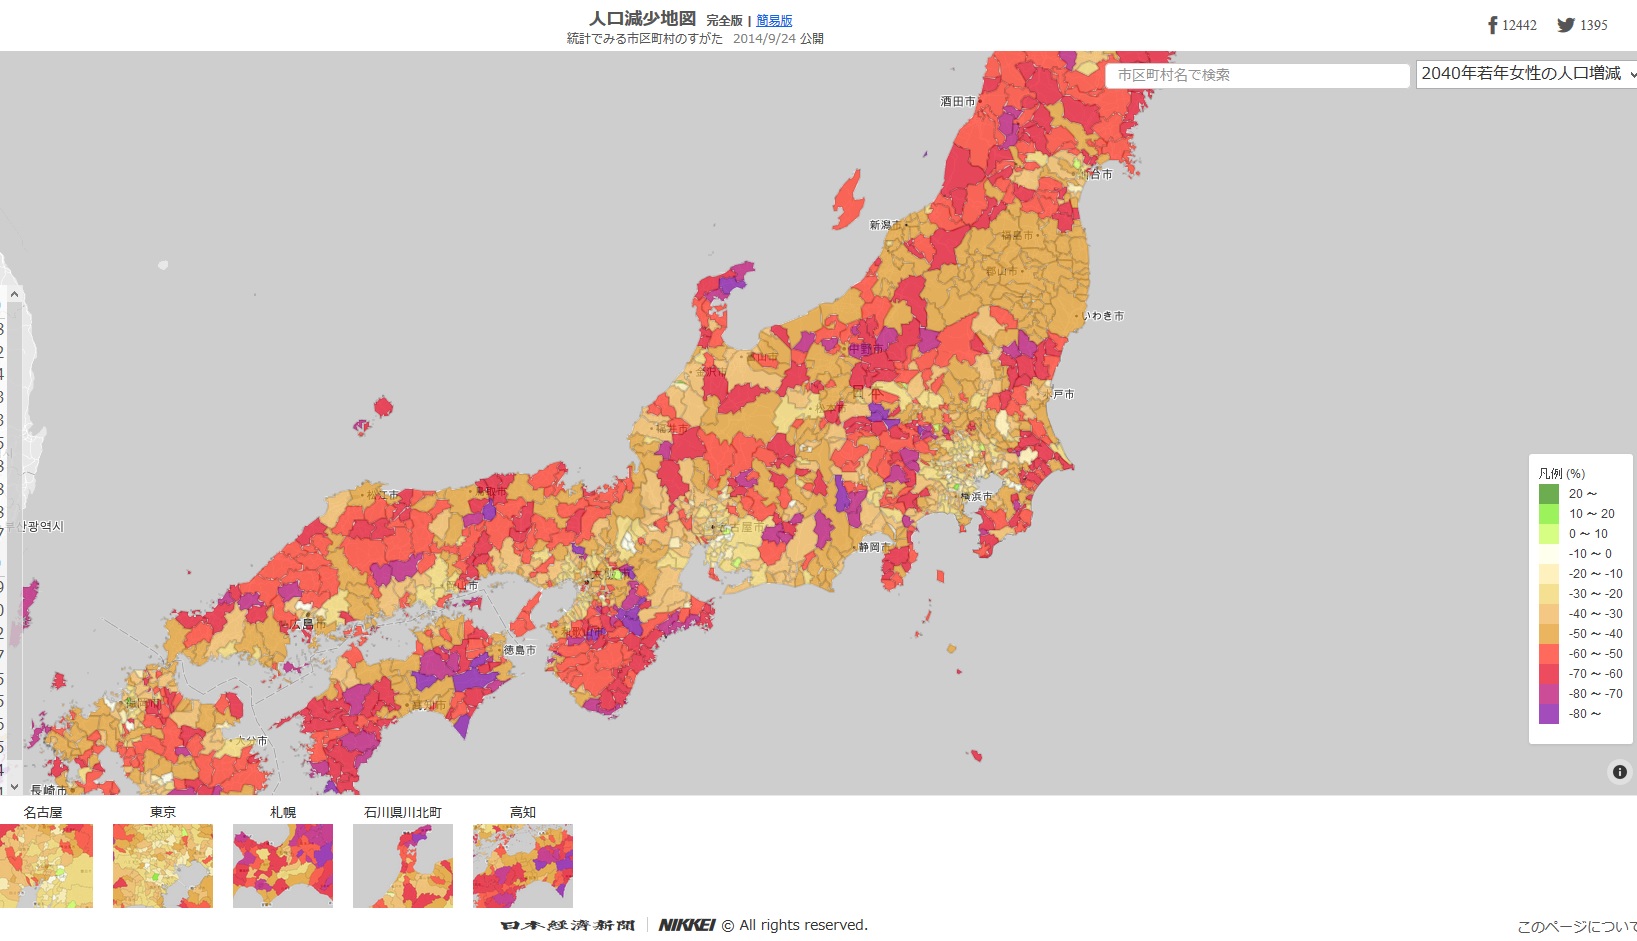 Online Population Decrease Map Of Japan Paints A Bleak Womanless Future For The Country Soranews24 Japan News